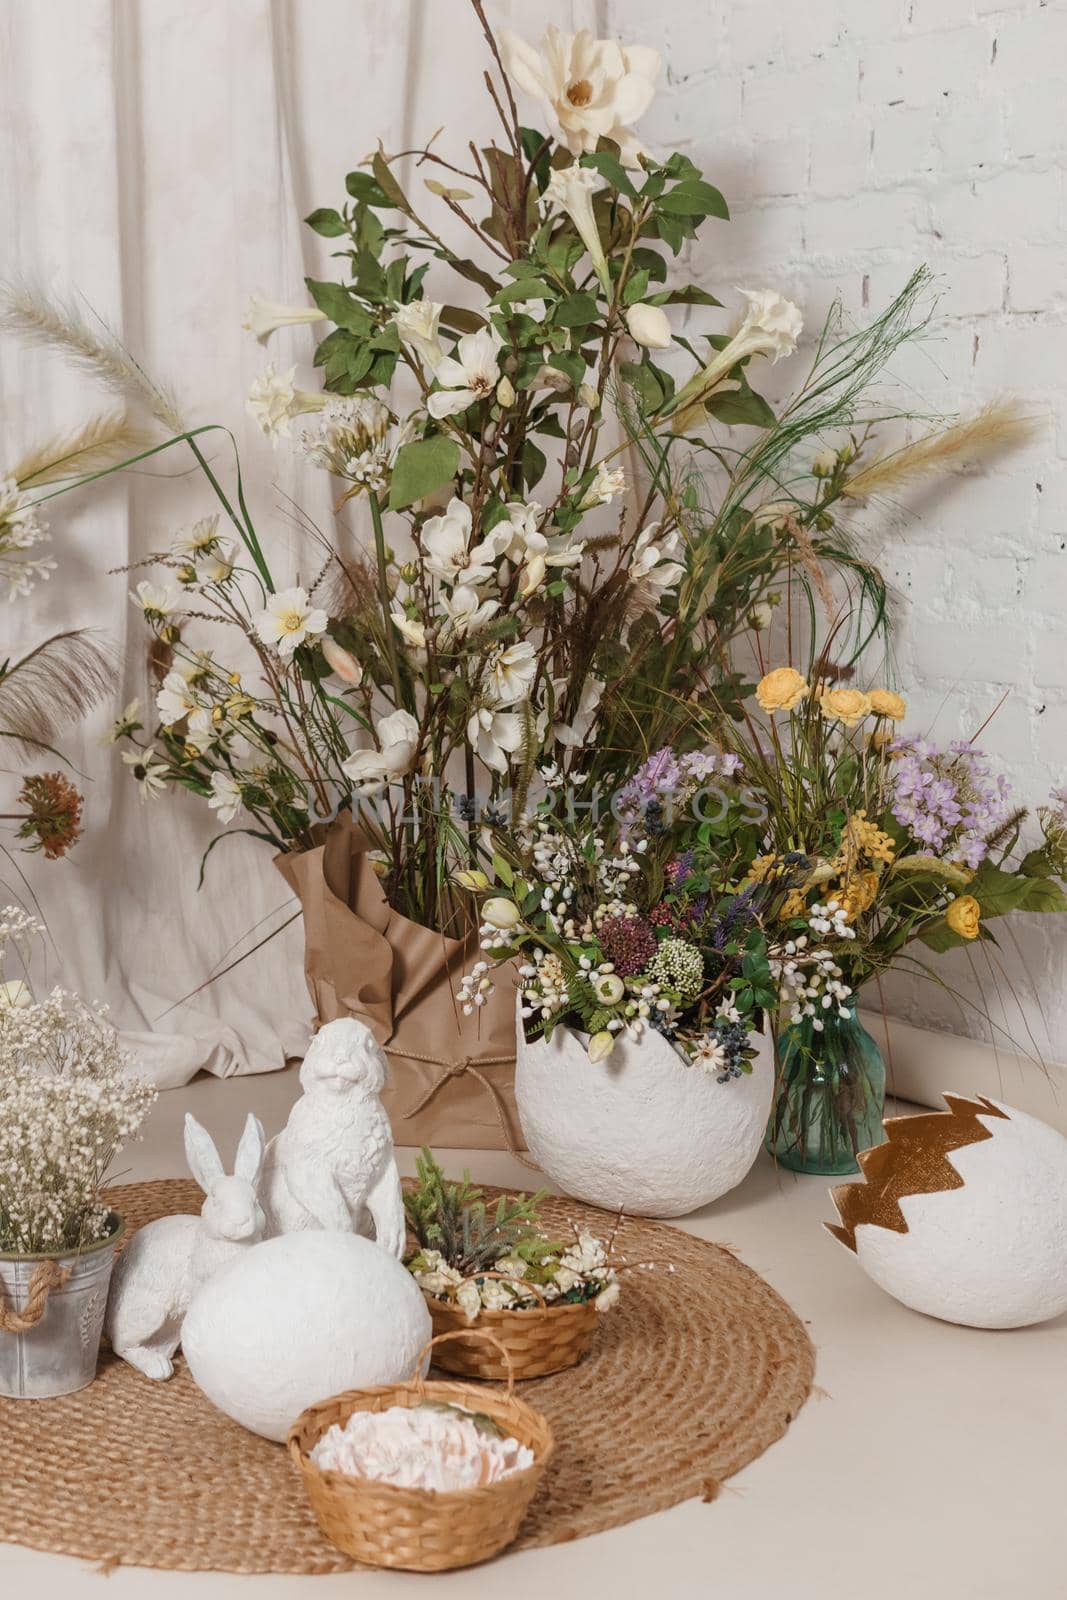 Interior floral Easter composition. Figurines of Easter bunnies and a large eggshell. The concept of home decoration for the Happy Easter holiday by Annu1tochka